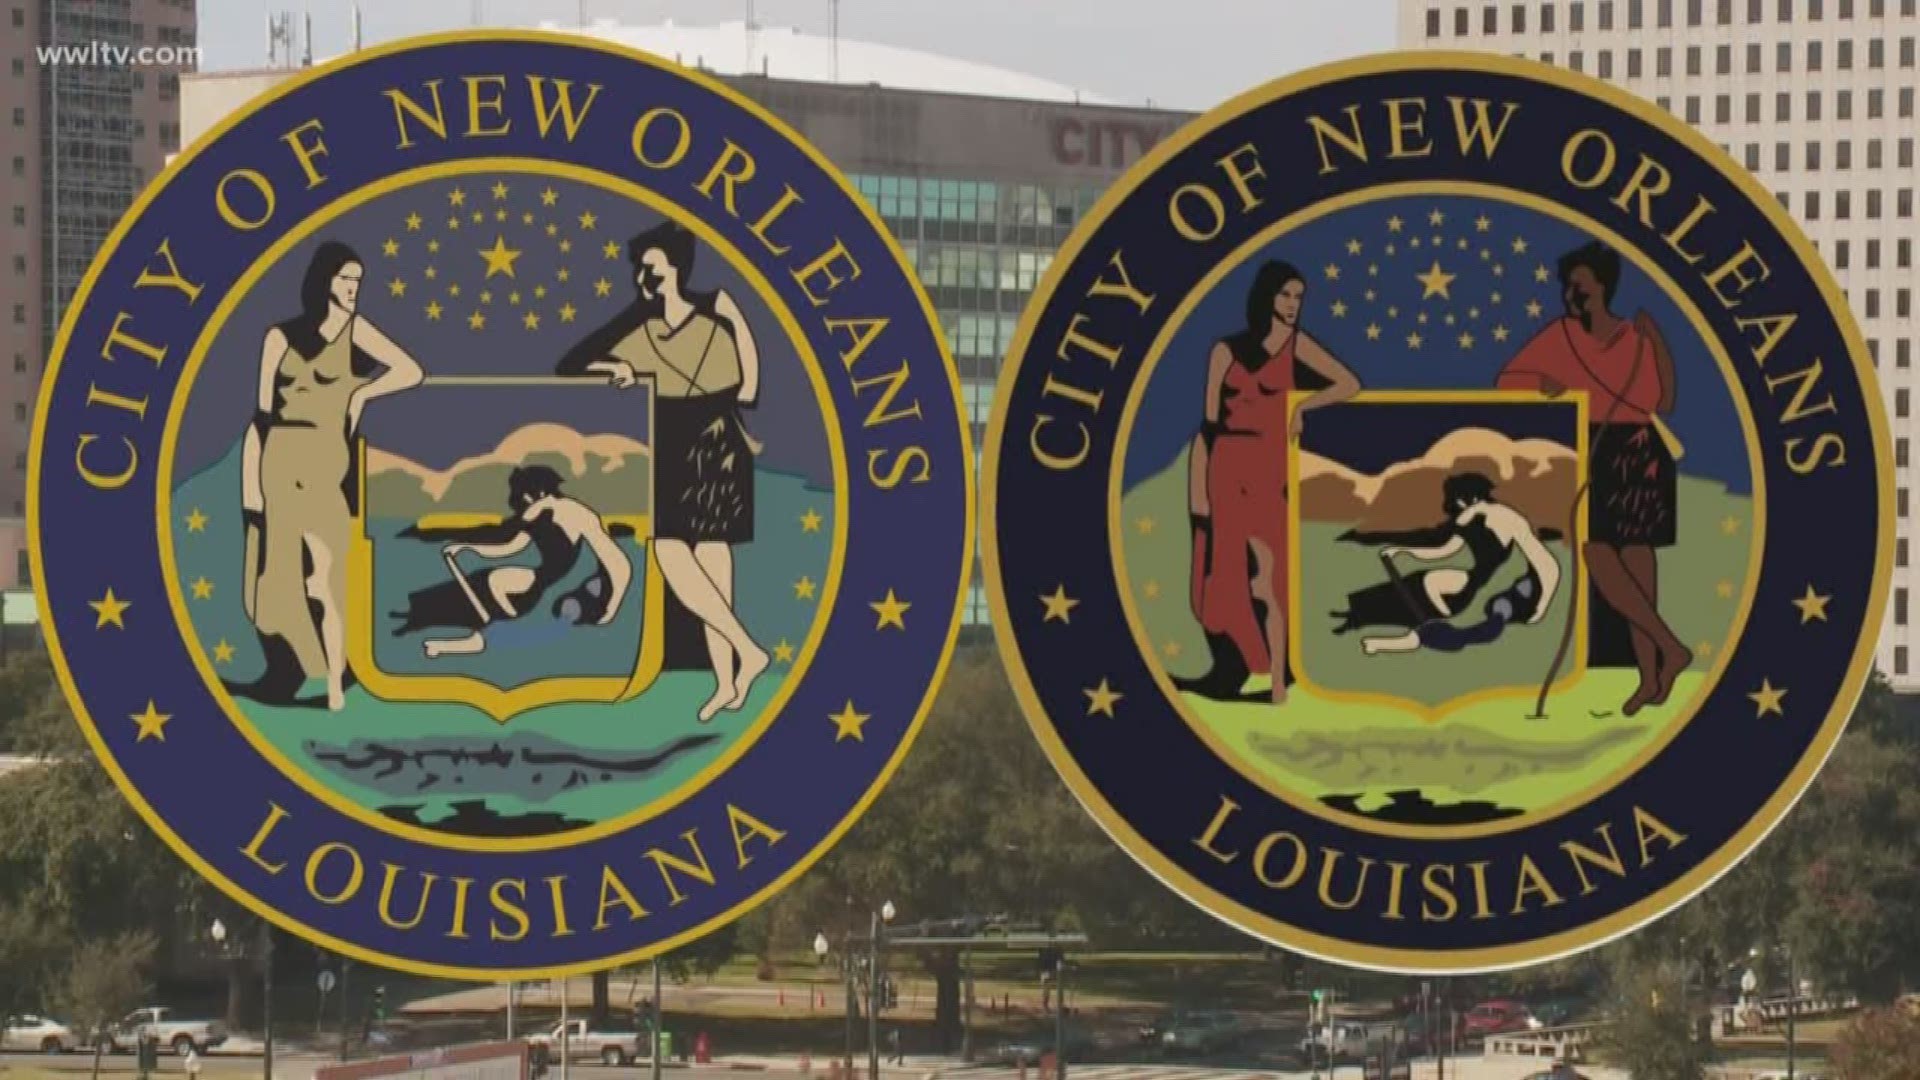 Mayor LaToya Cantrell took to social media Friday to post a more inclusive version of the City of New Orleans seal.